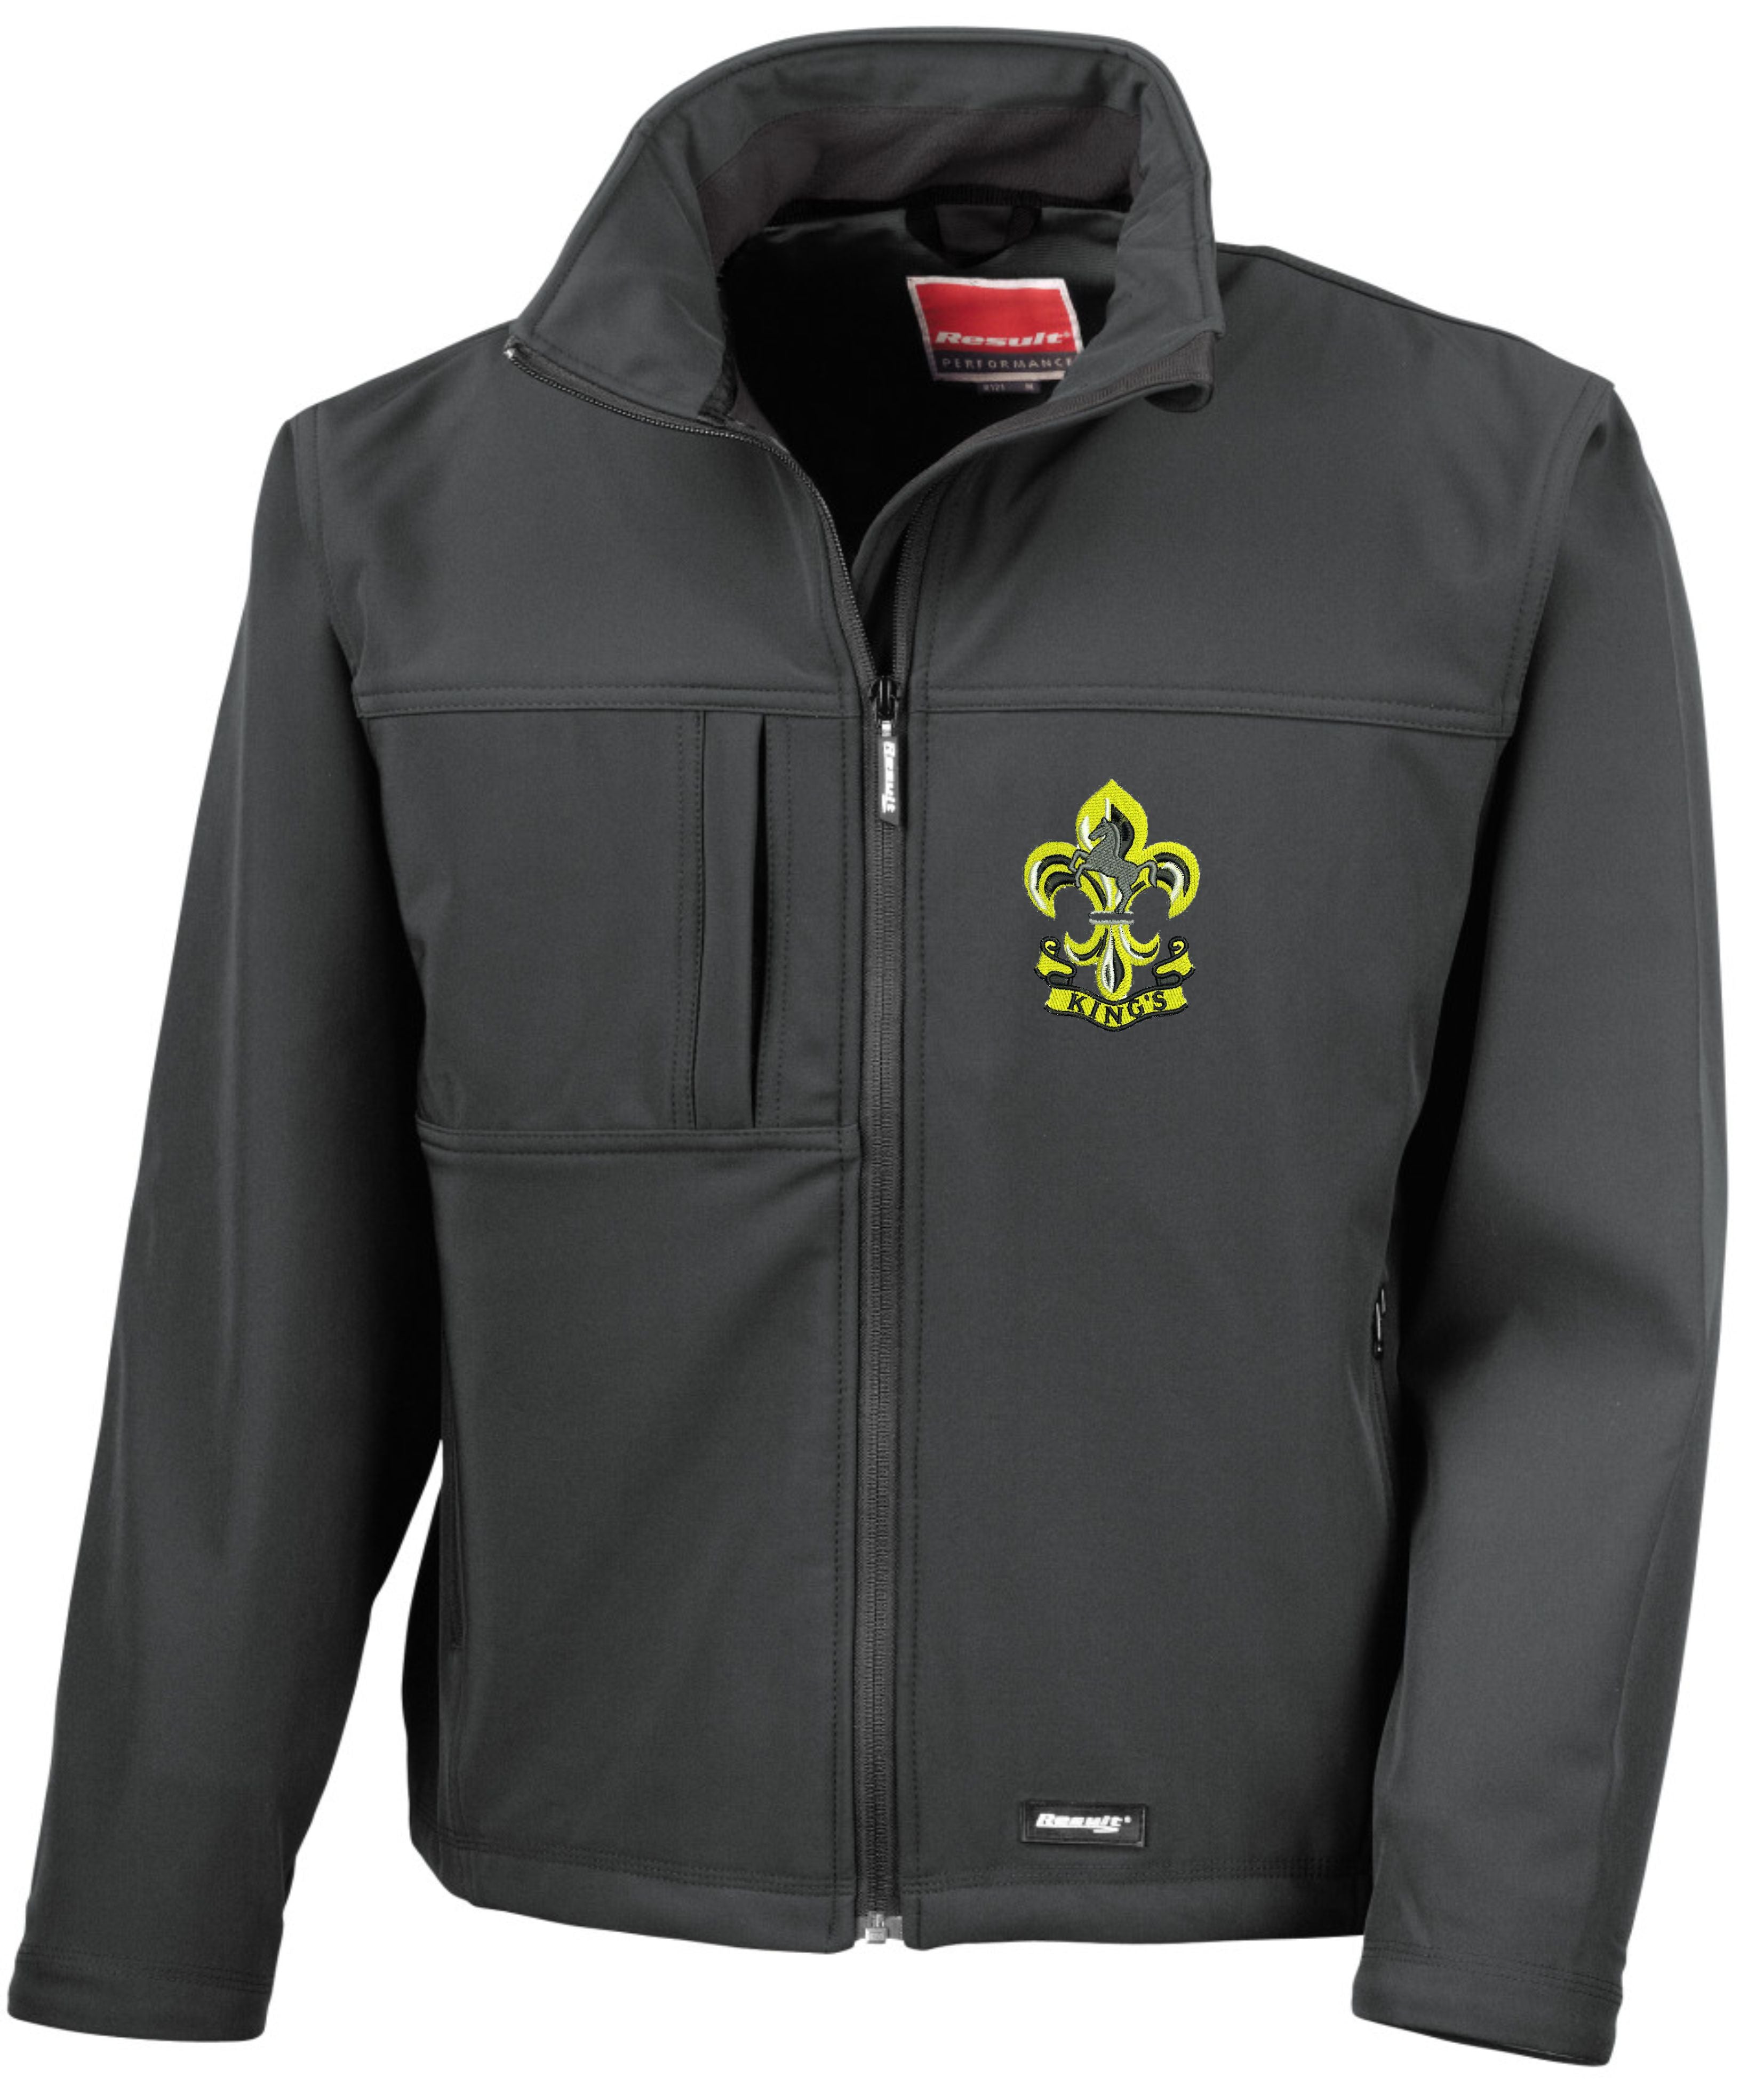 The Kings Regiment soft shell jacket